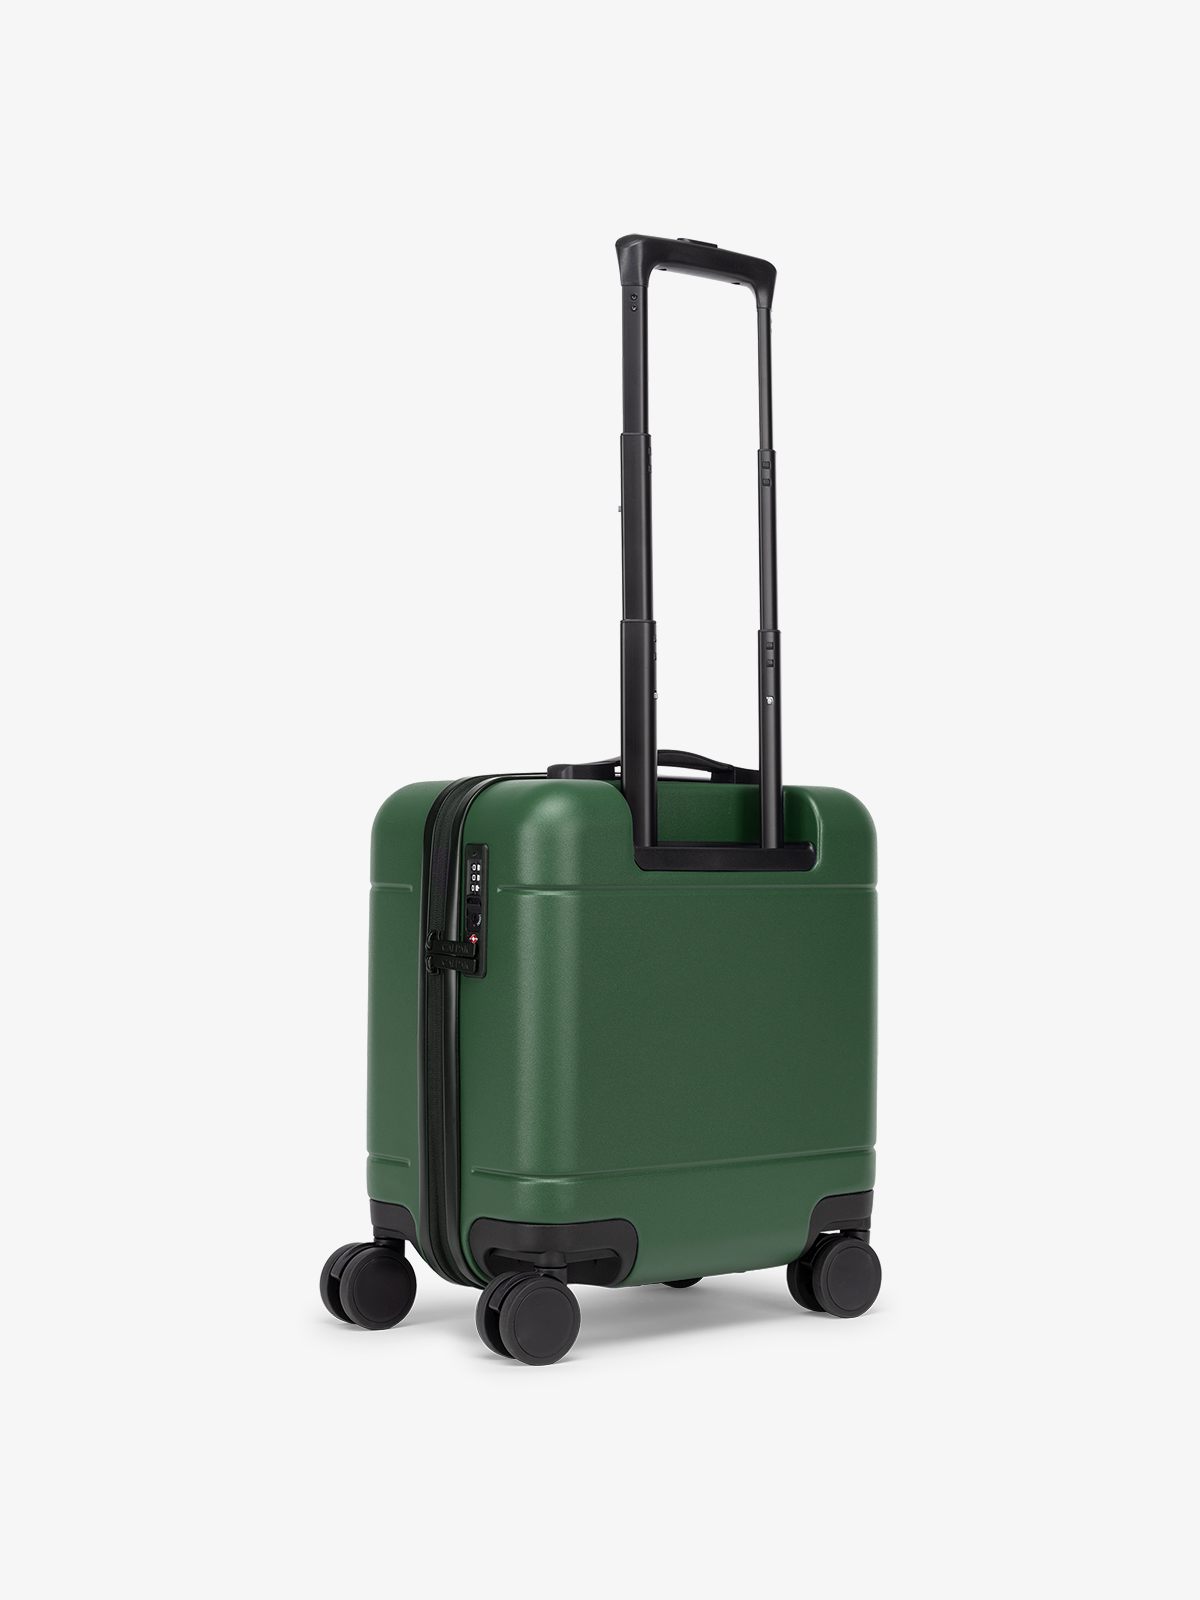 Emerald hue mini carry on luggage with telescopic handle